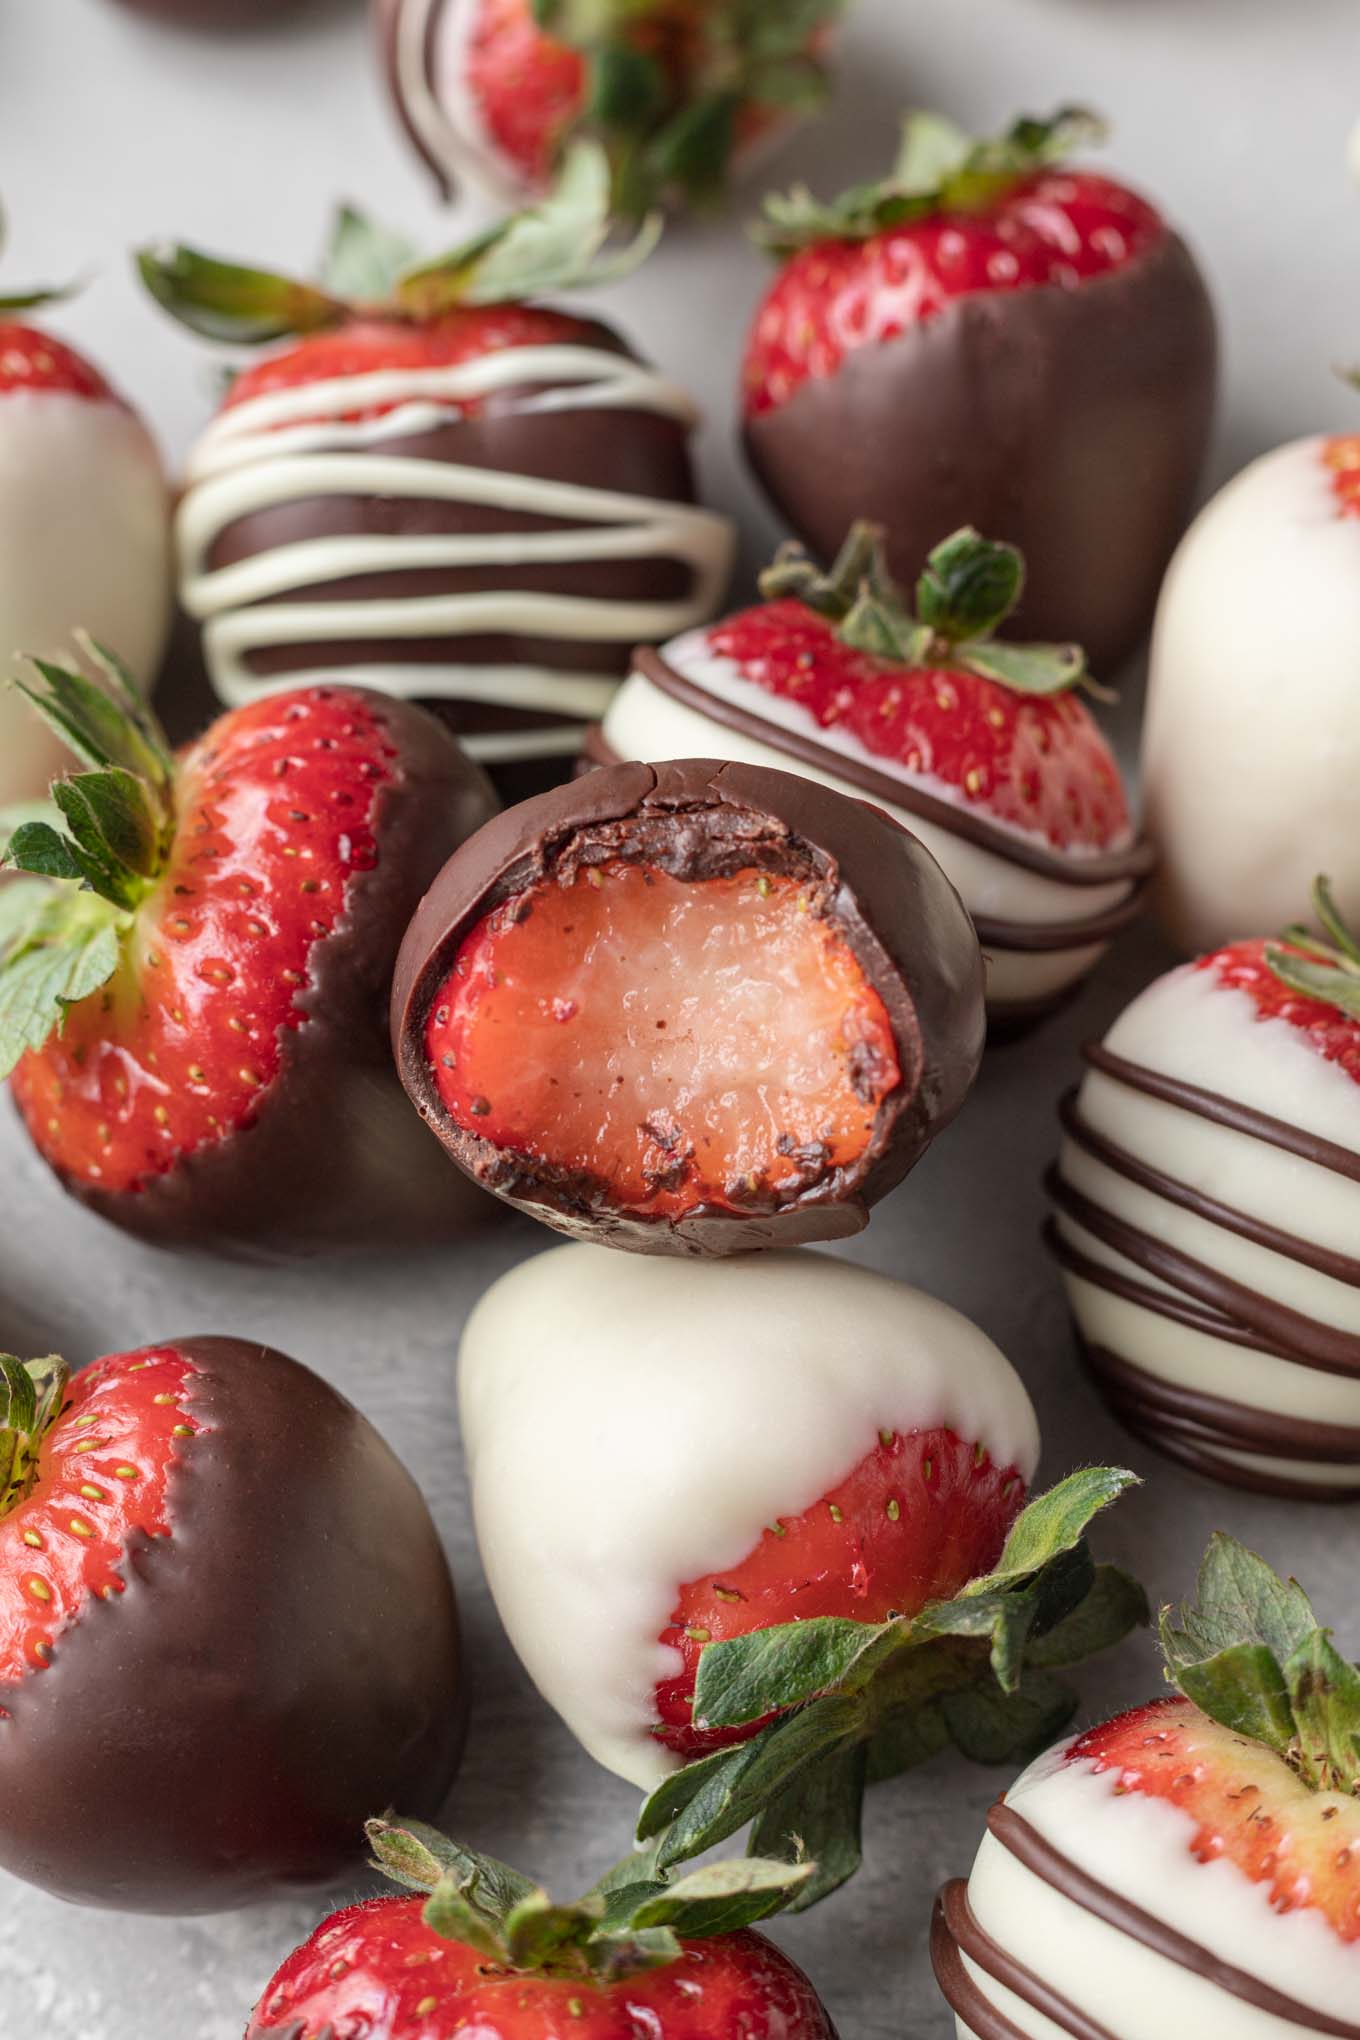 Several chocolate covered strawberries on a piece of parchment paper. One strawberry has a bite taken out of it.